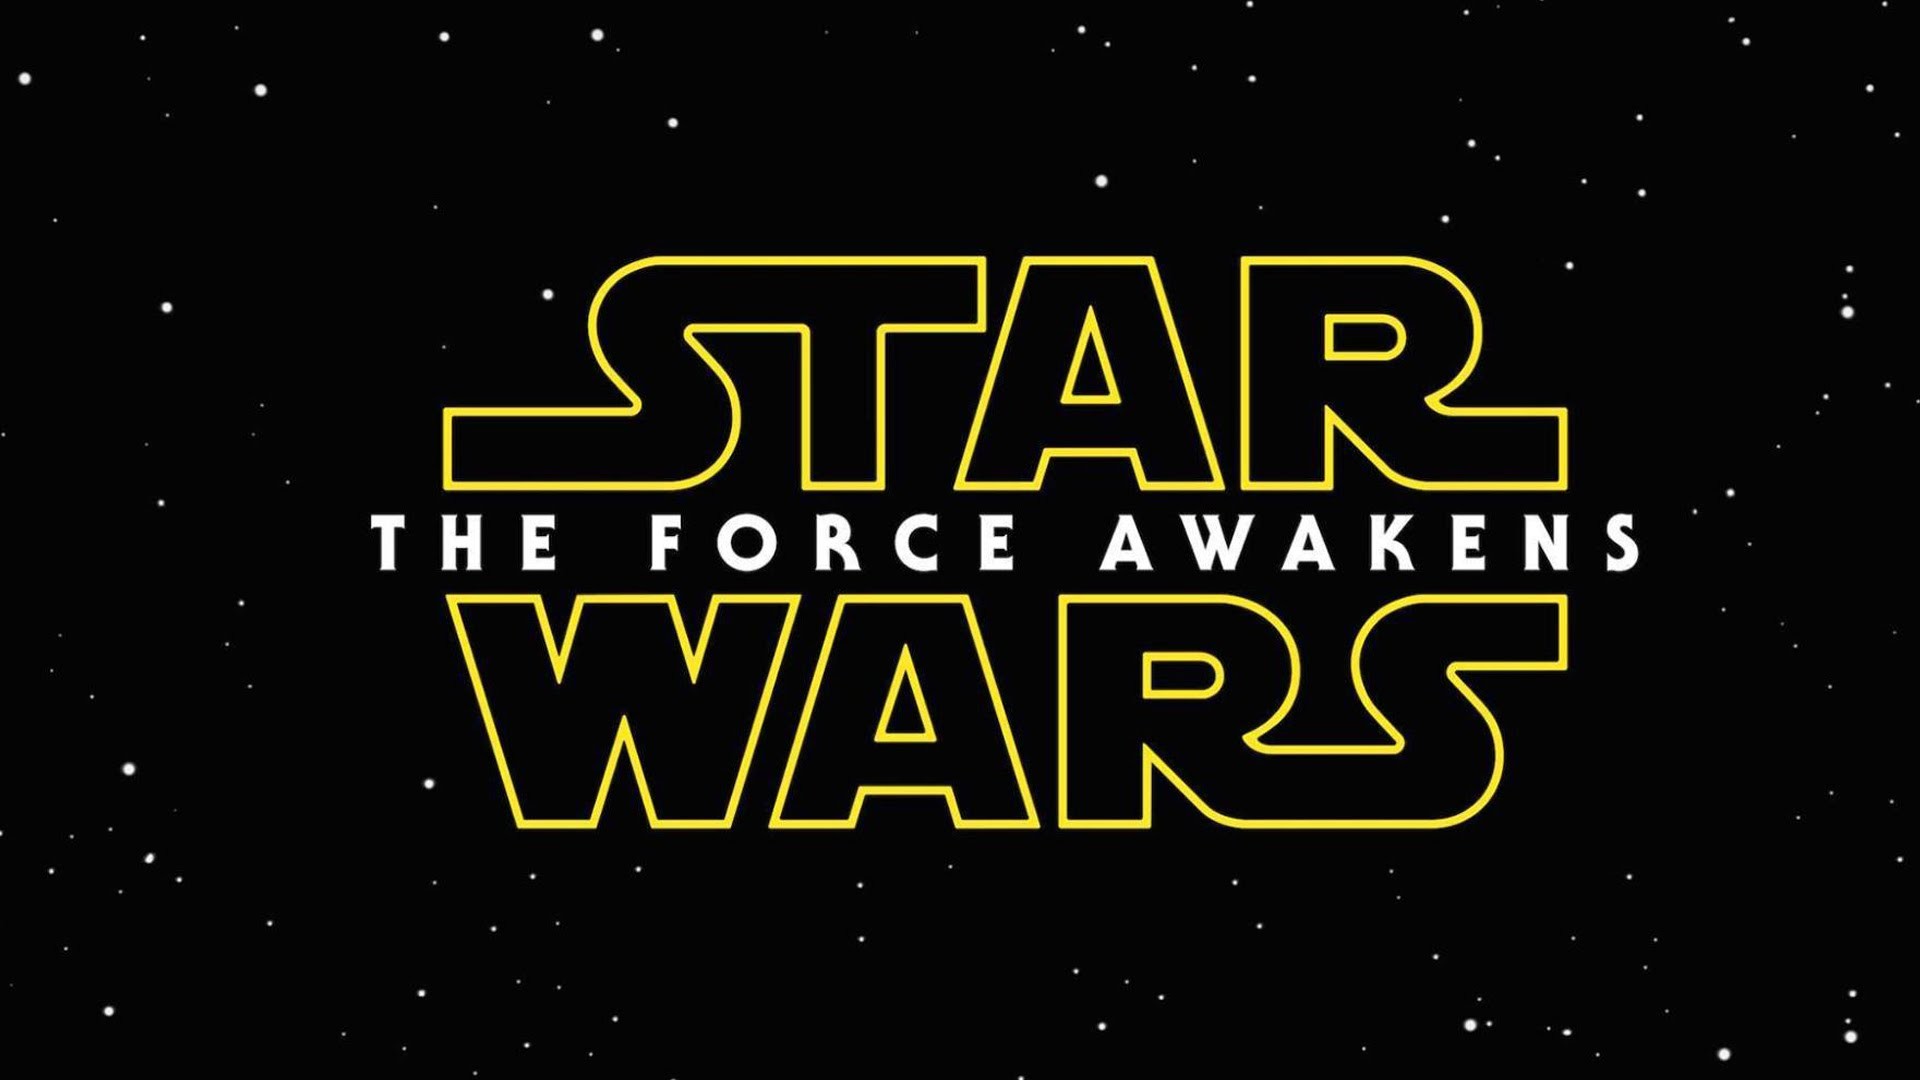 Long Beach Cinemas is expecting large crowds for the opening of “Star Wars: The Force Awakens” on Friday.